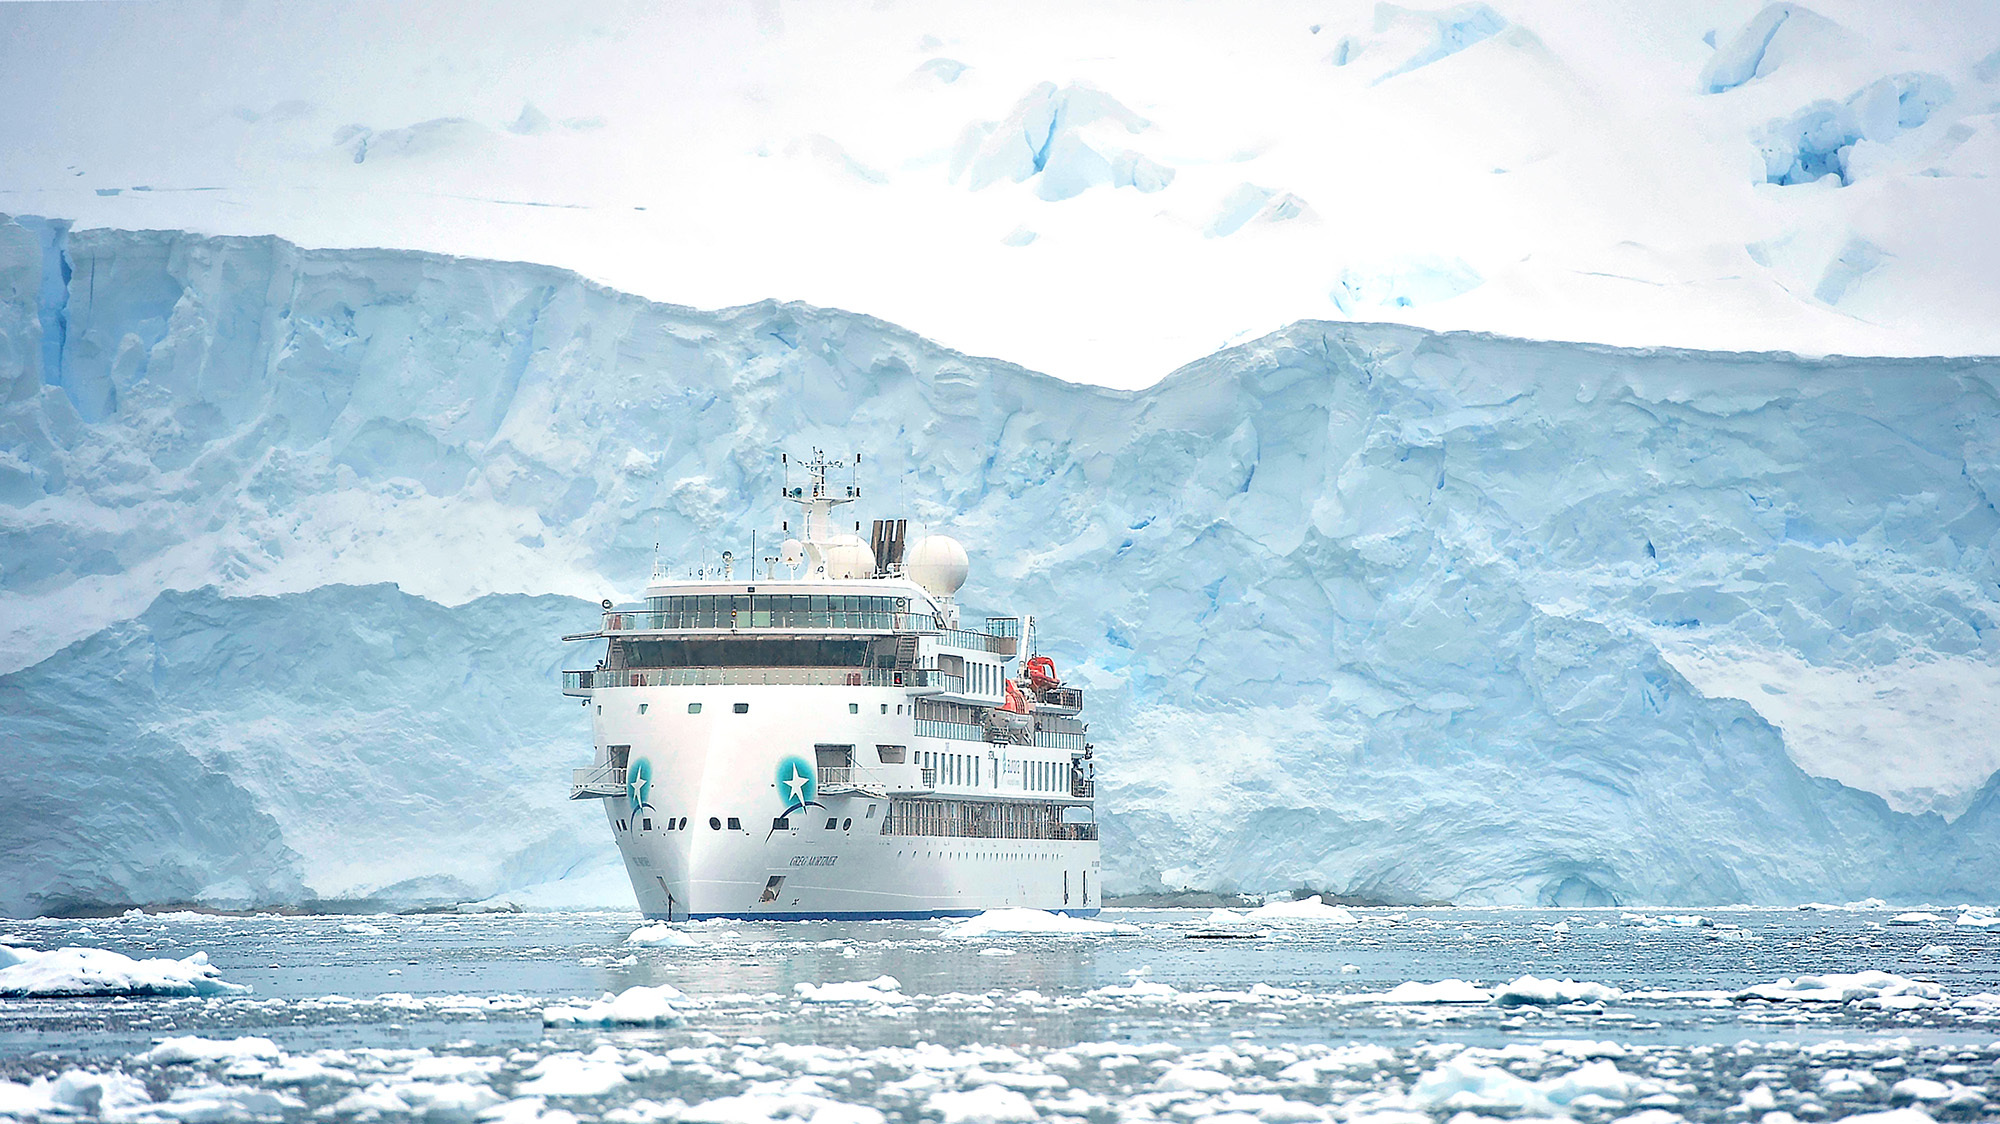 Our expedition cruise portfolio includes vessels for cold and warm climates.